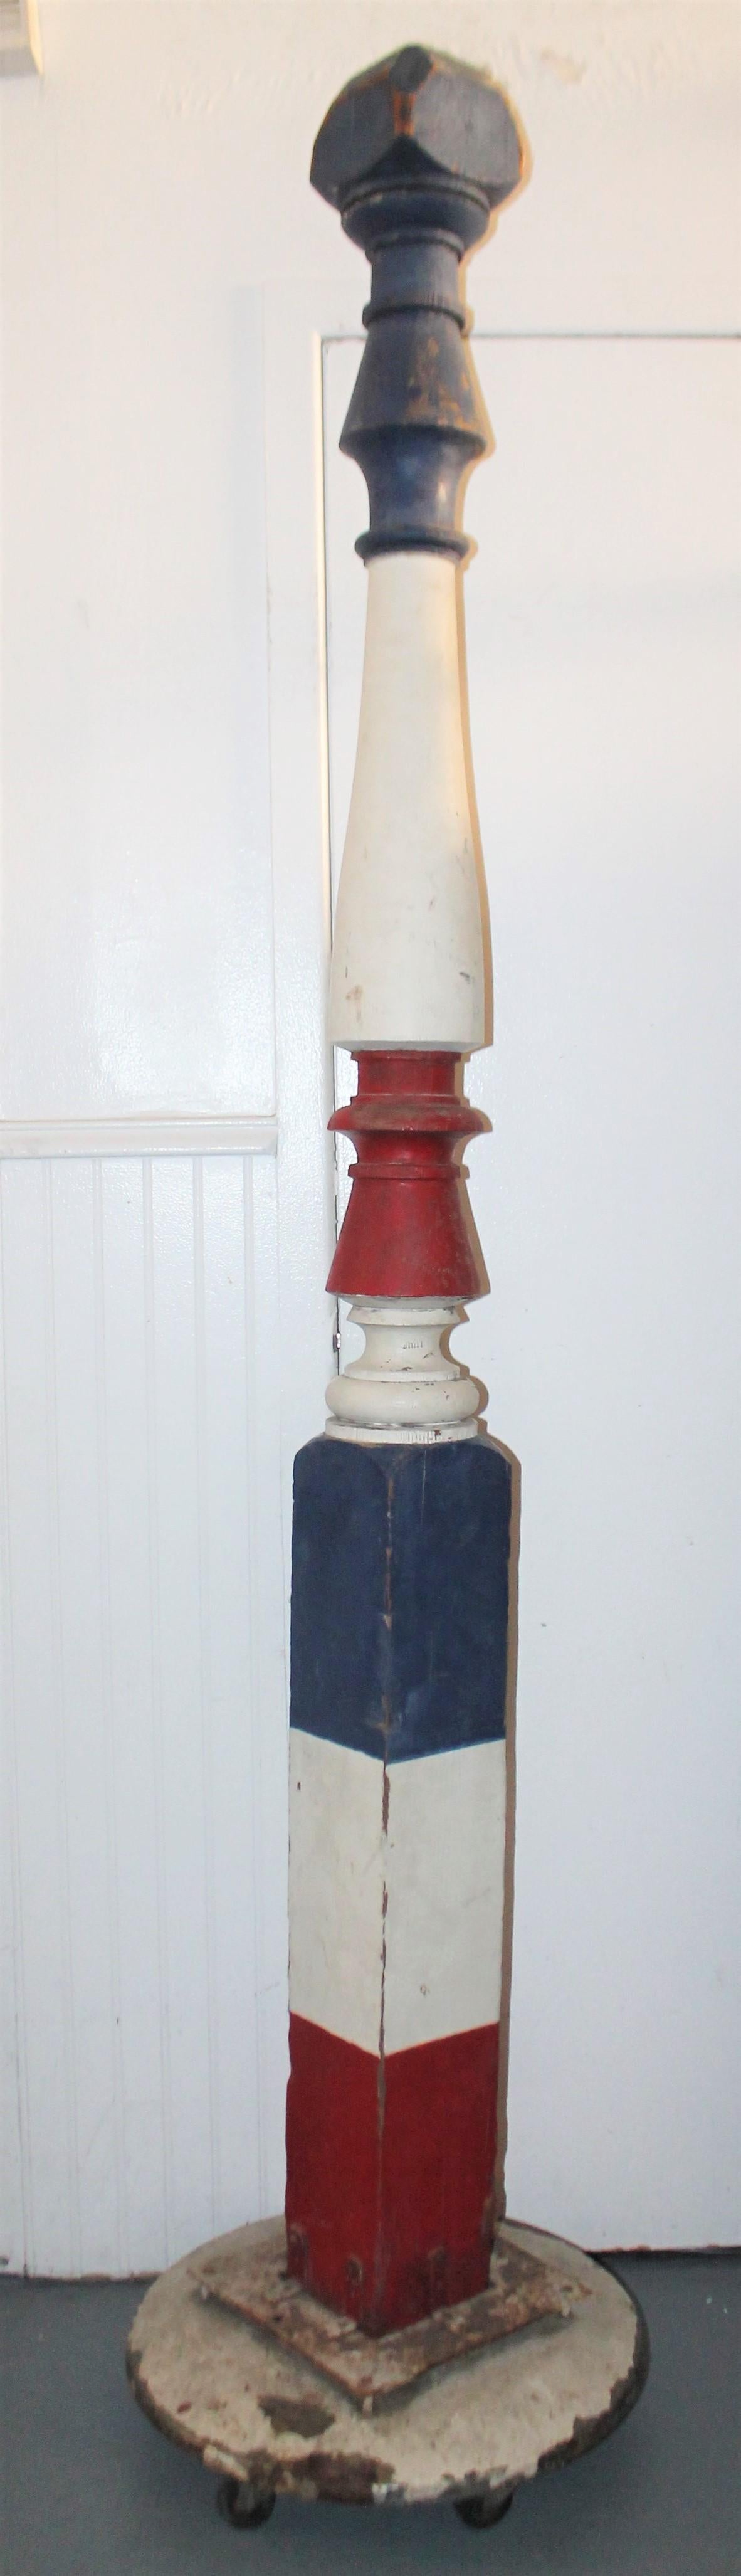 This funky barber pole was found in the mid west and retains its original painted surface. Painted Steve's name on the pole and iron base and wheels. Steve's I’m sure was painted years later but has age to it as well. The base is very cool and has